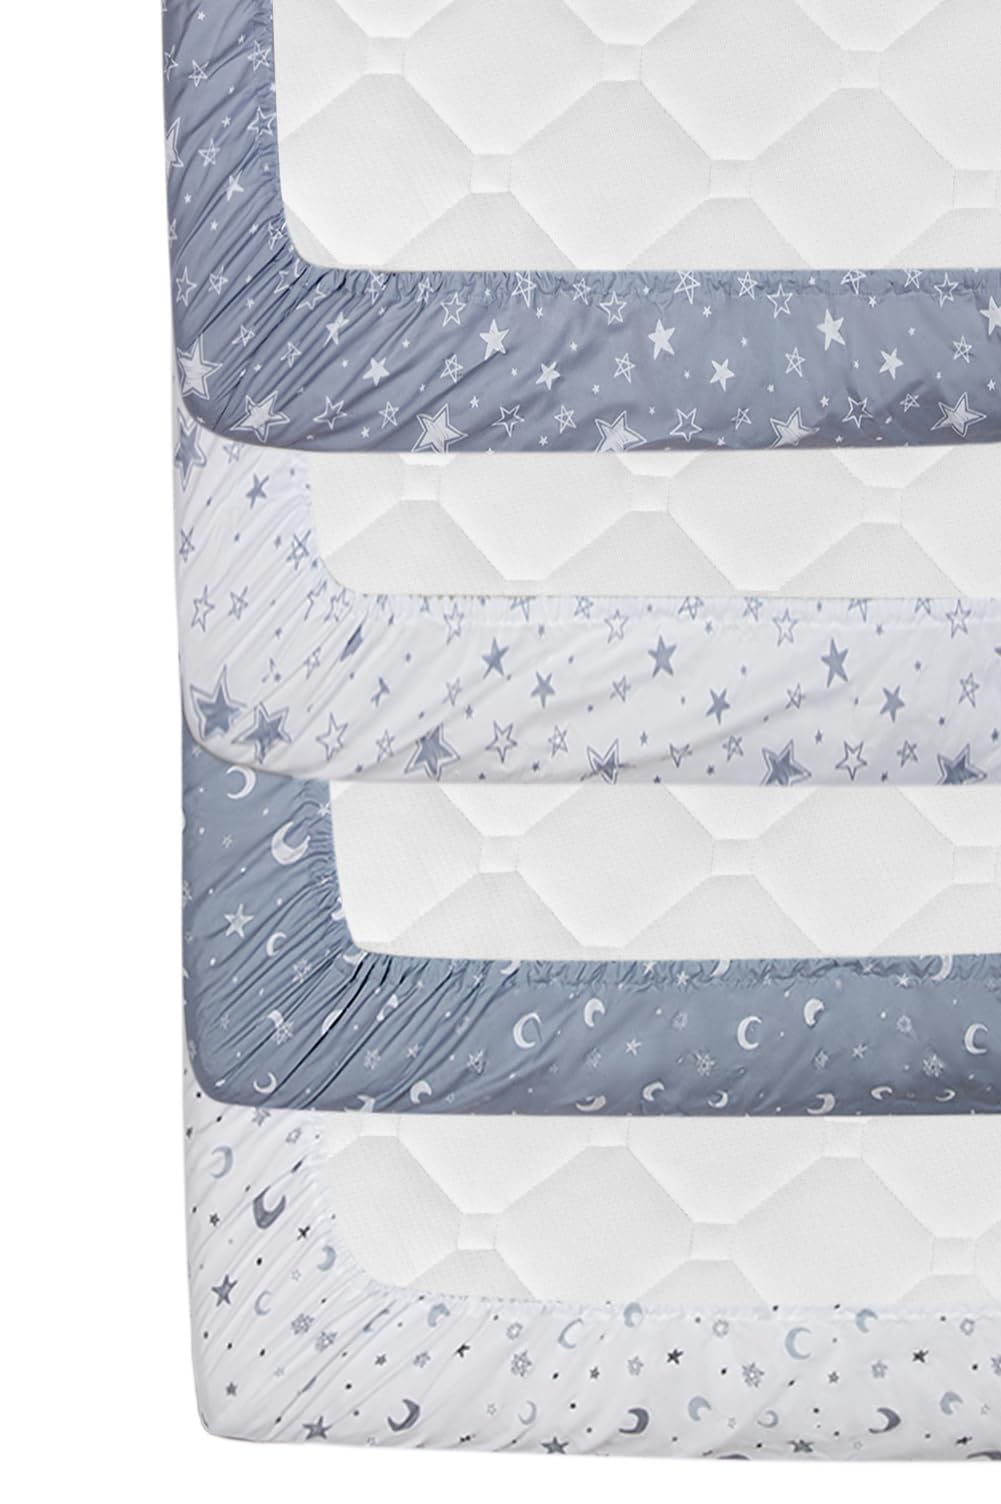 4 Pack Star and Moon Neutral Unisex Fitted Baby Sheets Set for Baby Boys or Girls (Crib Sheets)